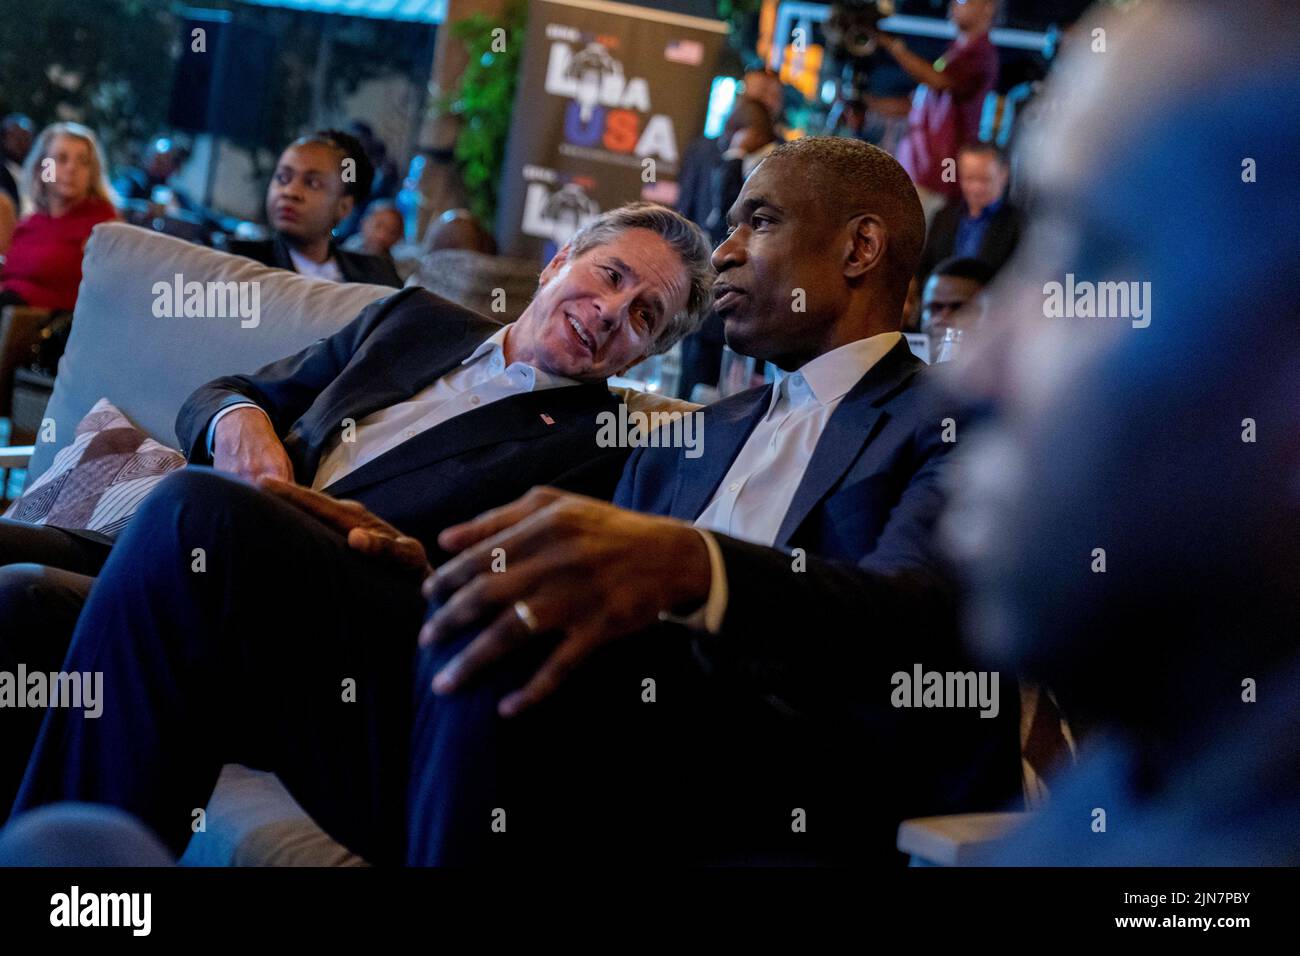 U.S. Secretary of State Antony Blinken and former NBA basketball superstar and Congo native Dikembe Mutombo speak together as they watch the 'Rainbow Band' perform at Villa Kilimanjaro in Kinshasa, Congo, August 9, 2022. Andrew Harnik/Pool via REUTERS Stock Photo